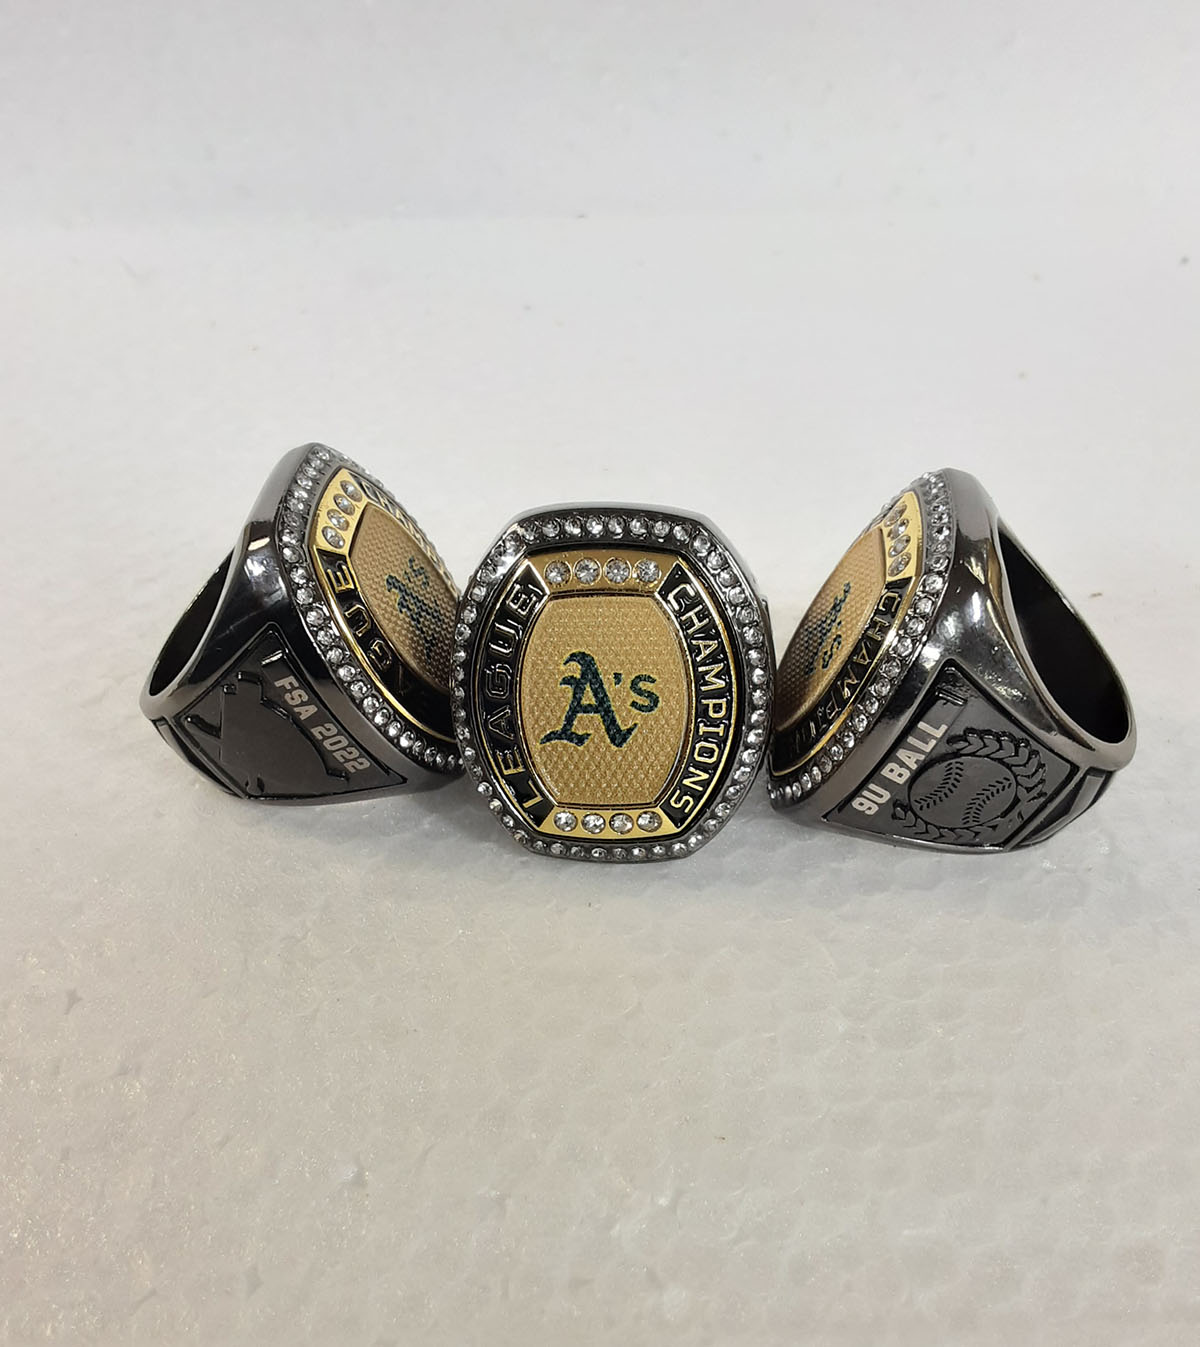 Girls and Women In Sports Championship Field Hockey Rings